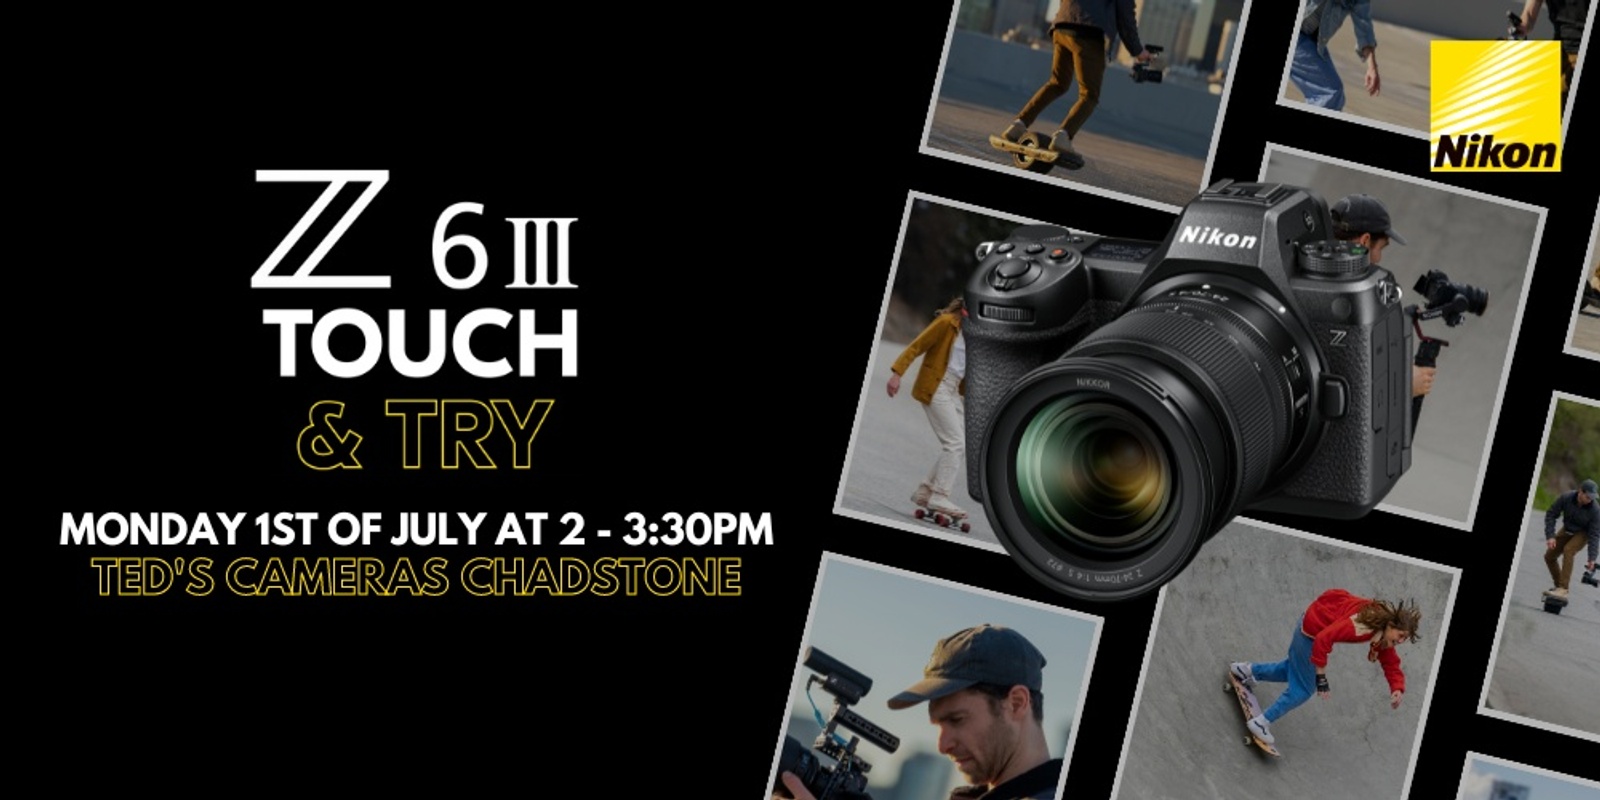 Banner image for Nikon Z6III Touch & Try Ted's Cameras Chadstone